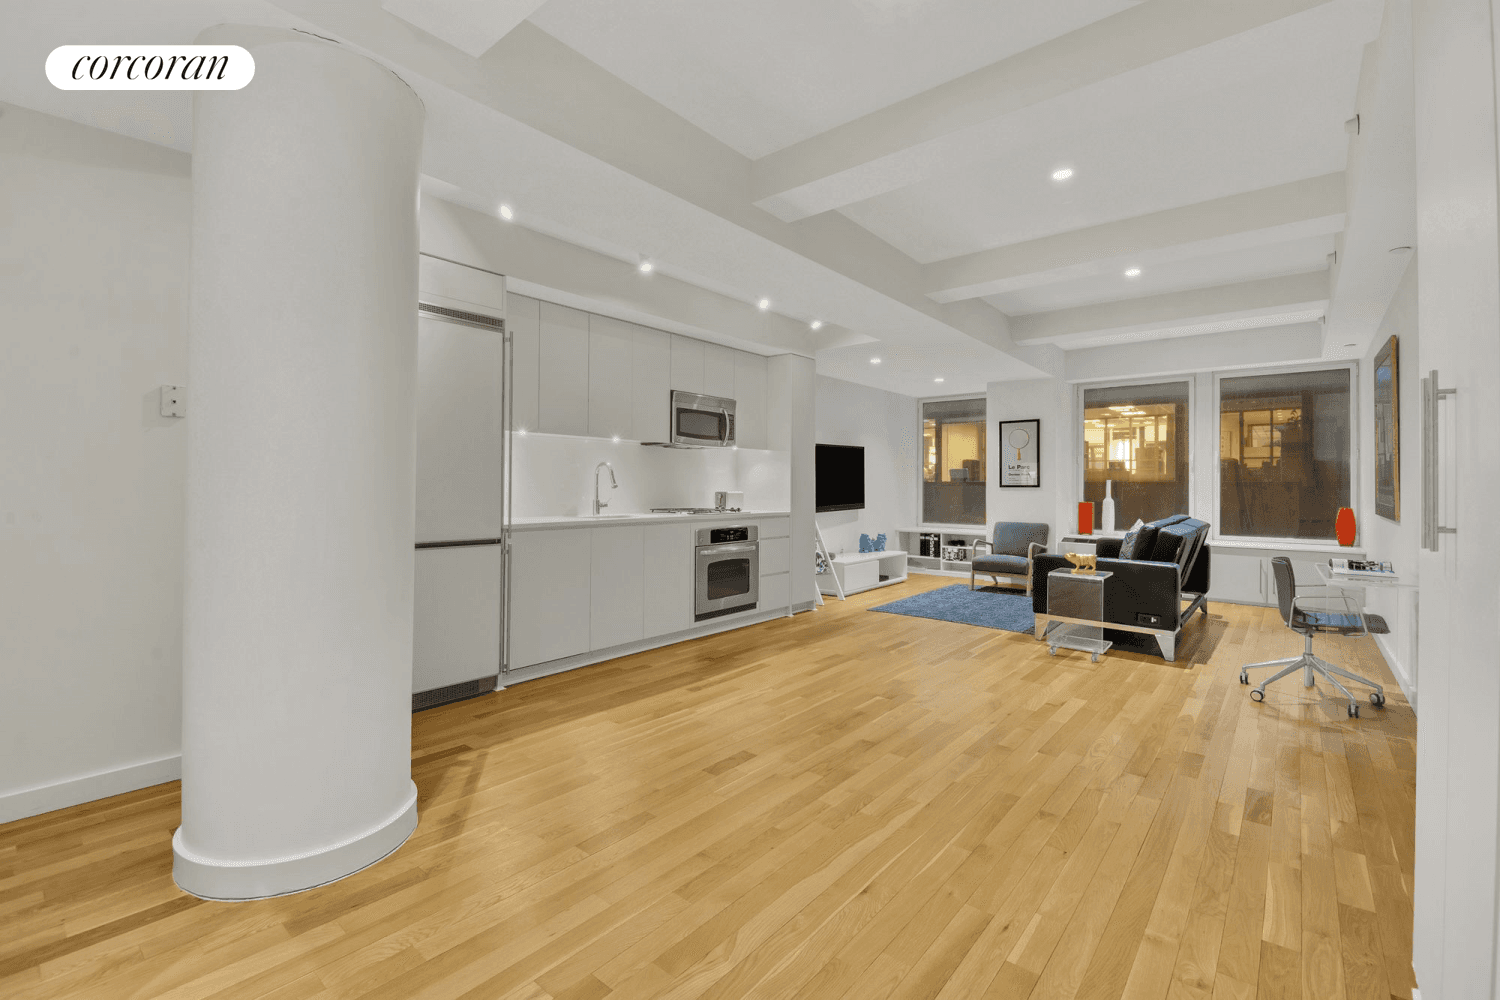 Welcome to 90 William Street 3F, where sophistication meets comfort in this spacious 845 square foot loft style apartment.